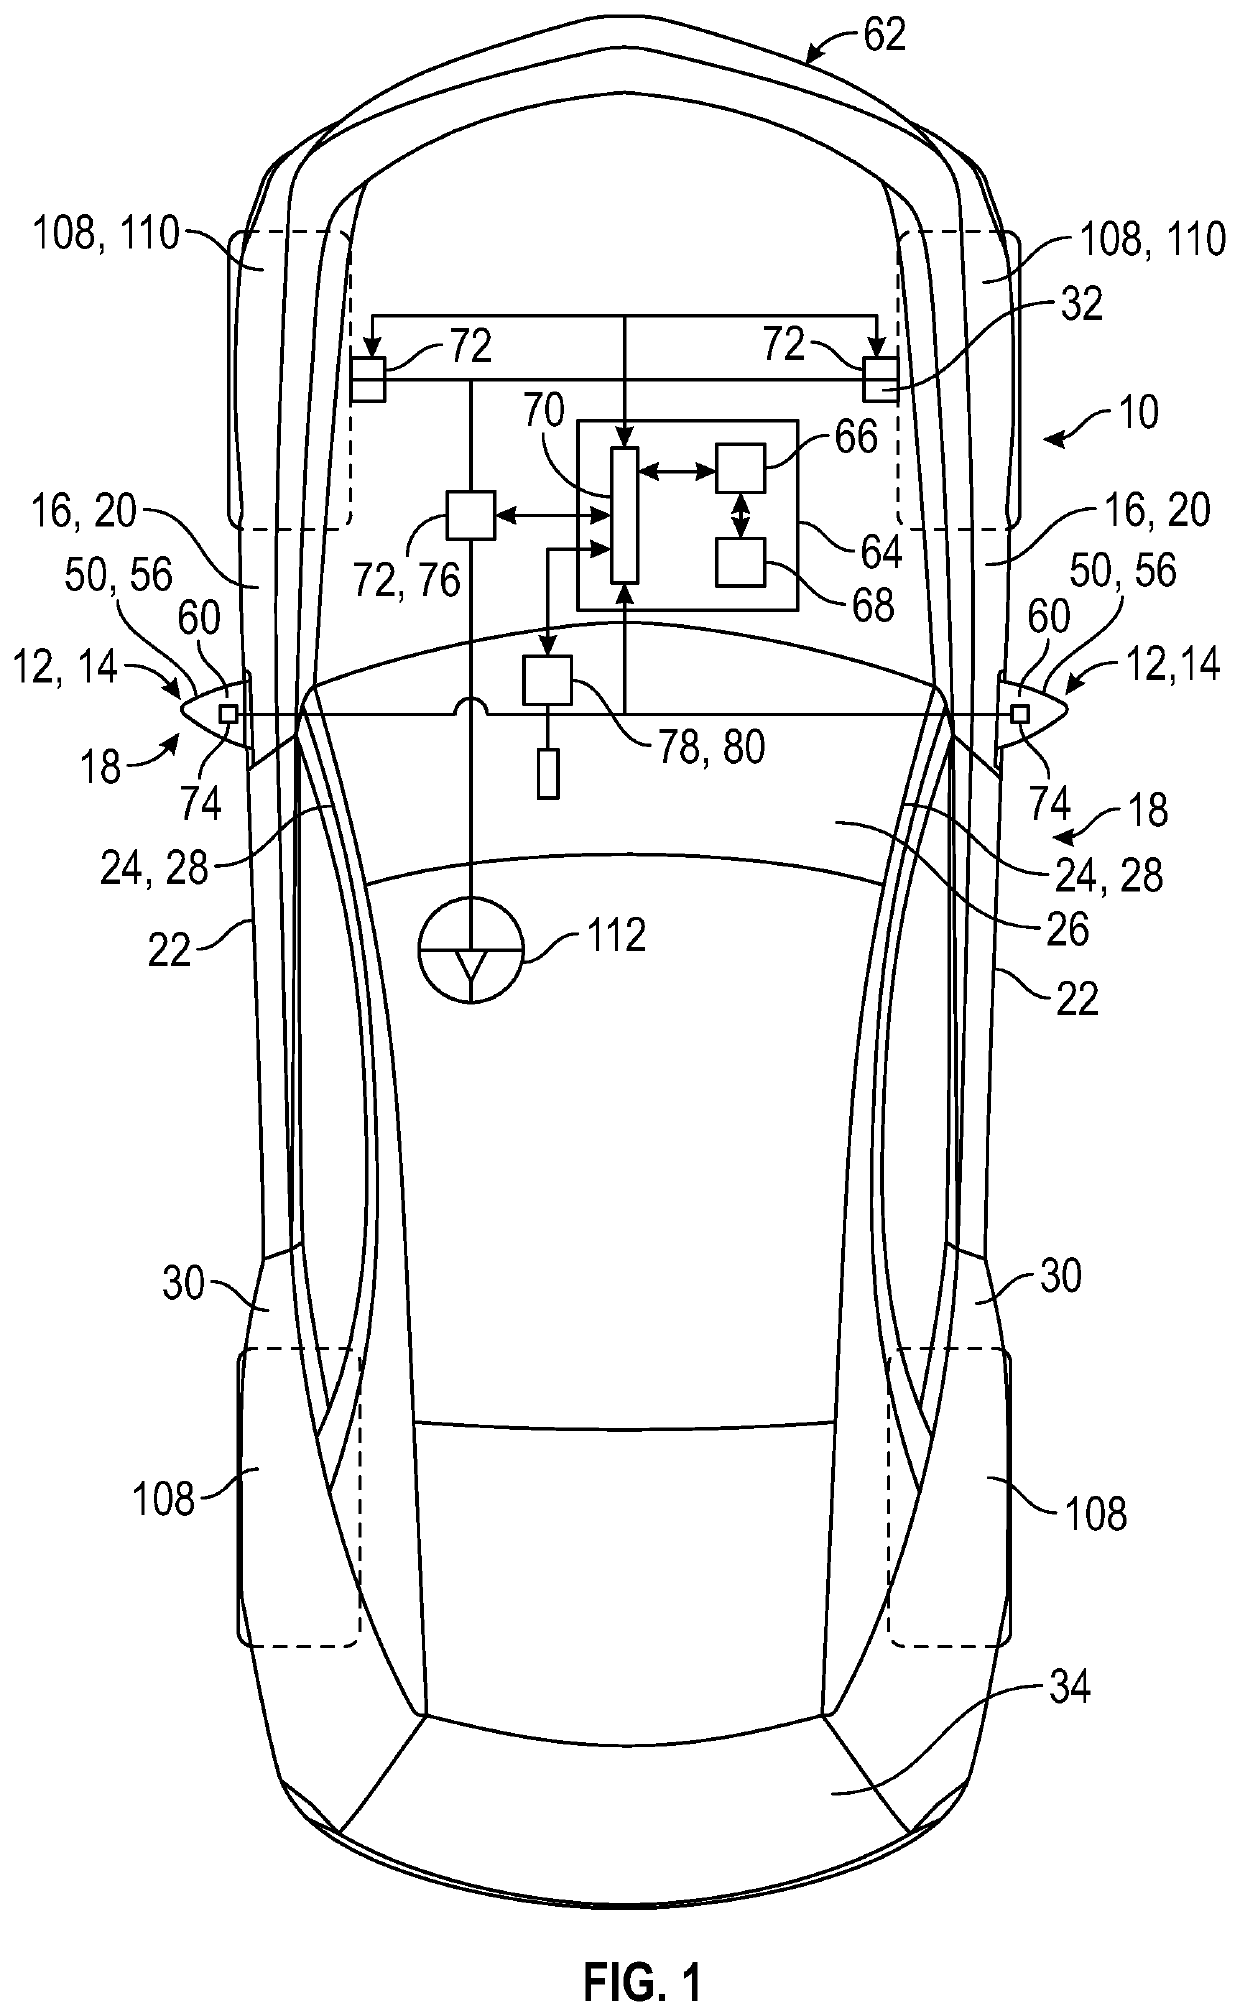 Active outside rear view device enclosure